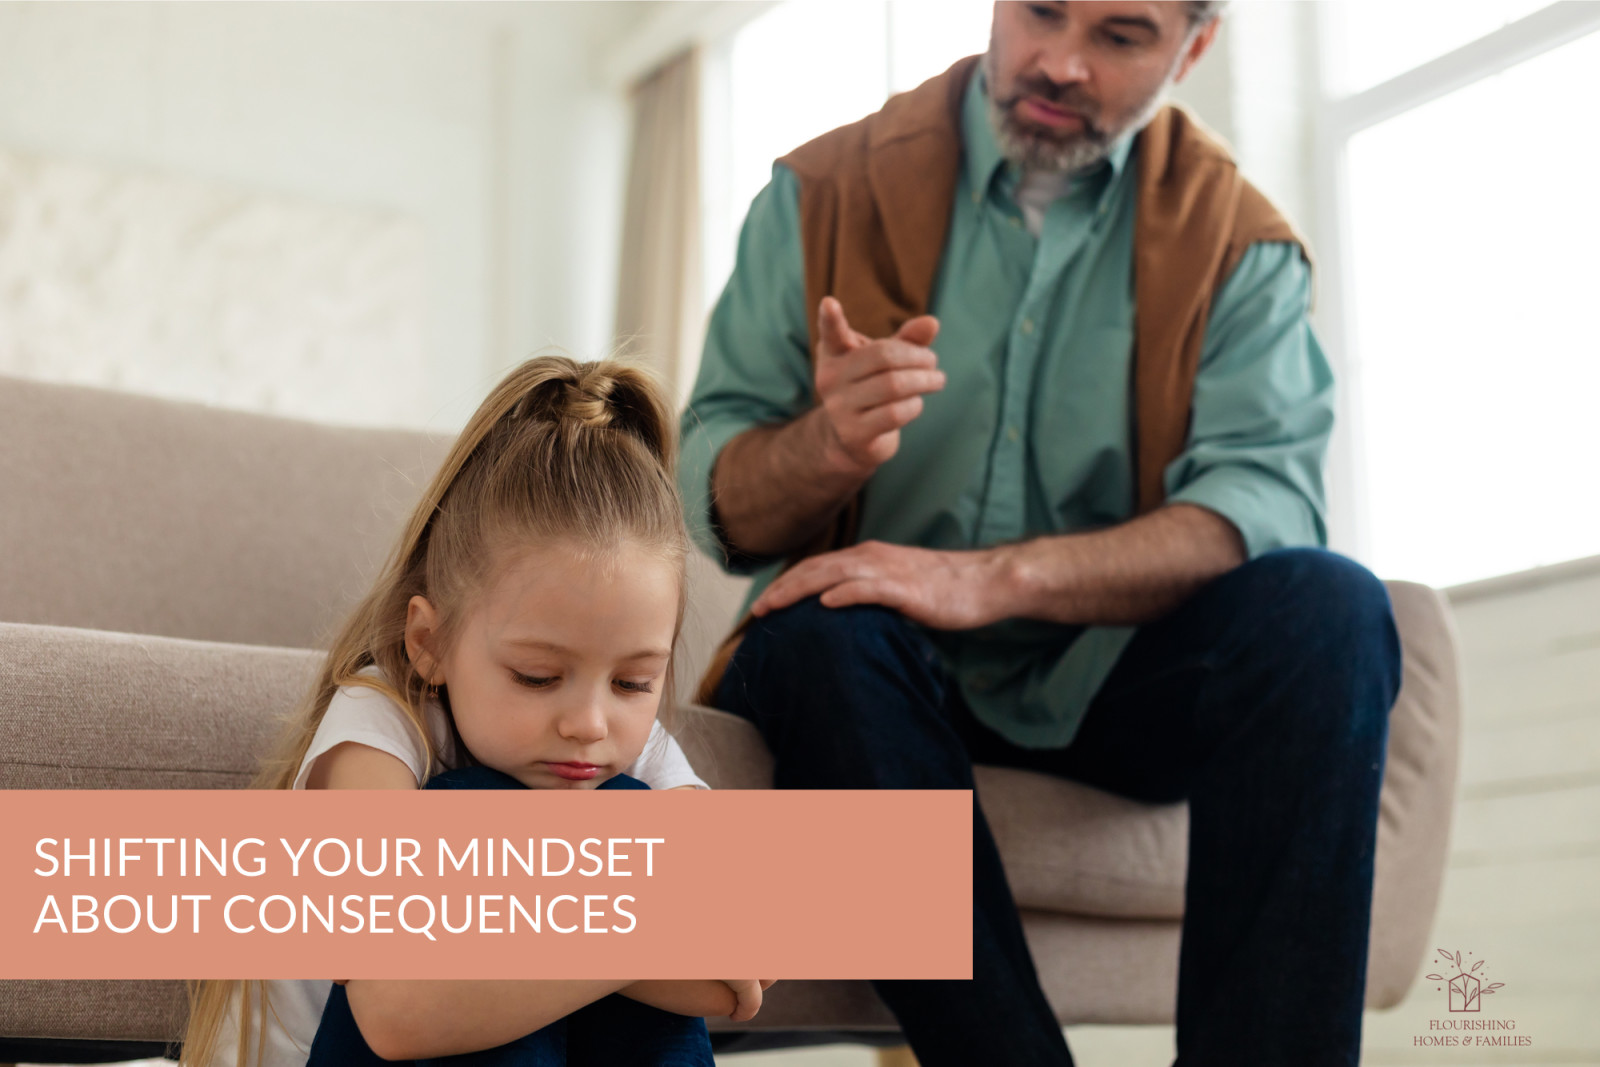 Shifting your mindset about consequences